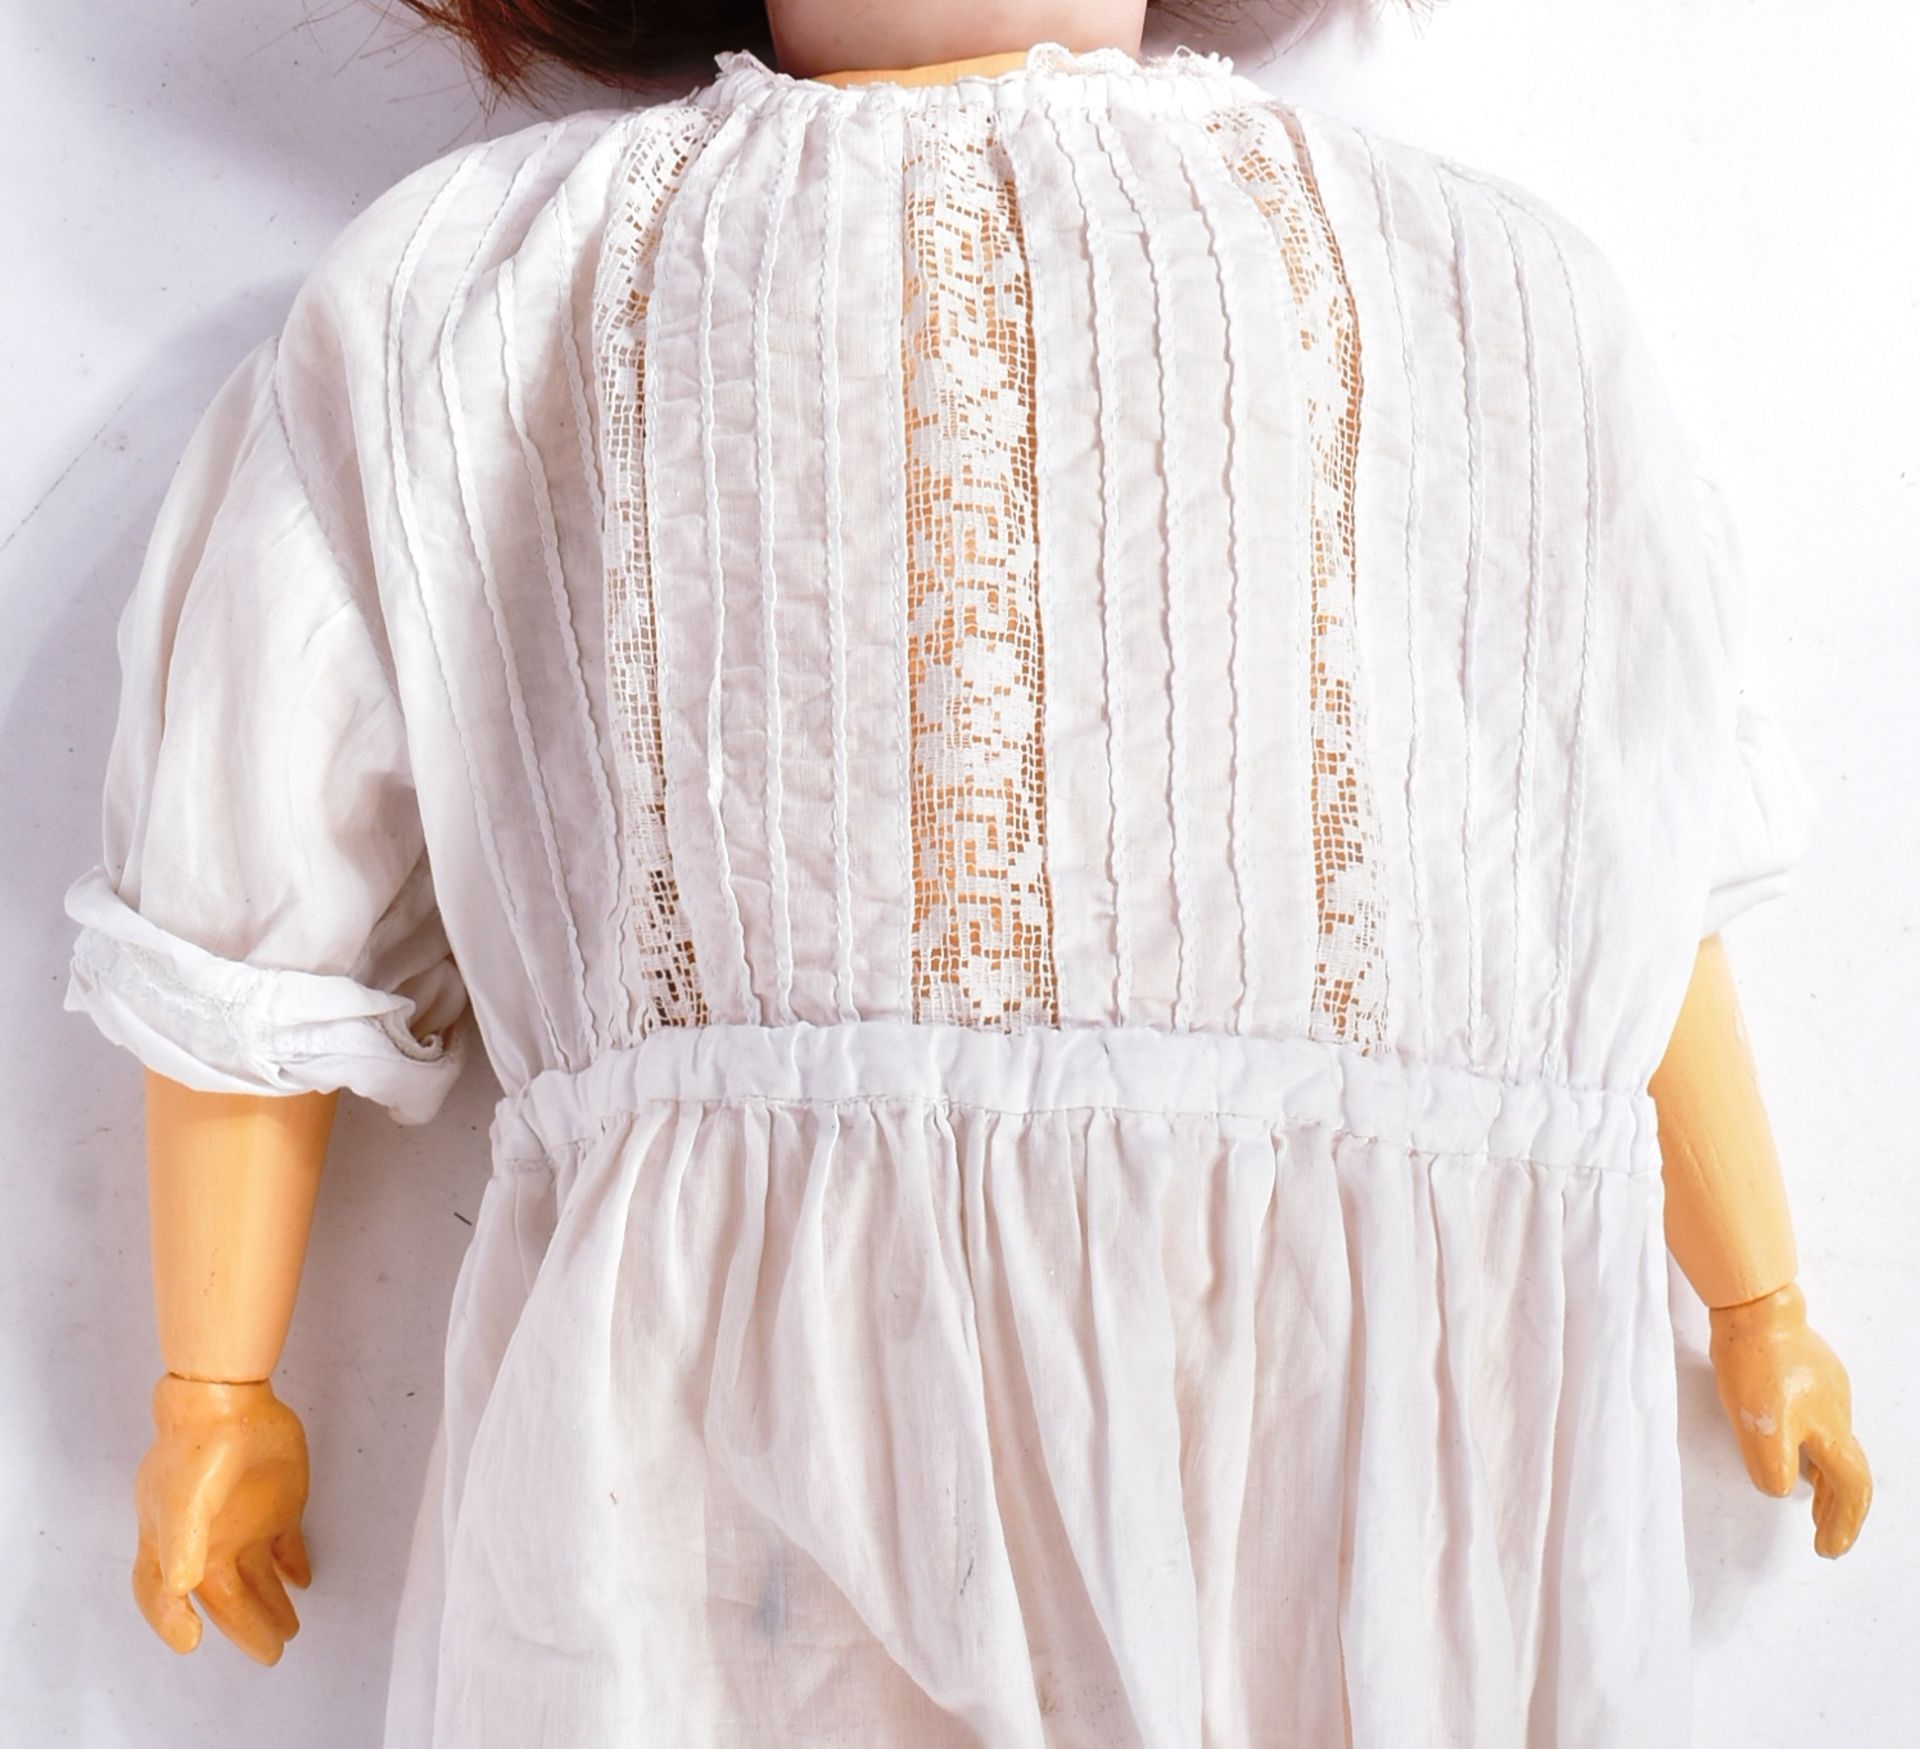 EARLY 20TH CENTURY GERMAN KAMMER & REINHARDT BISQUE HEADED DOLL - Image 3 of 5